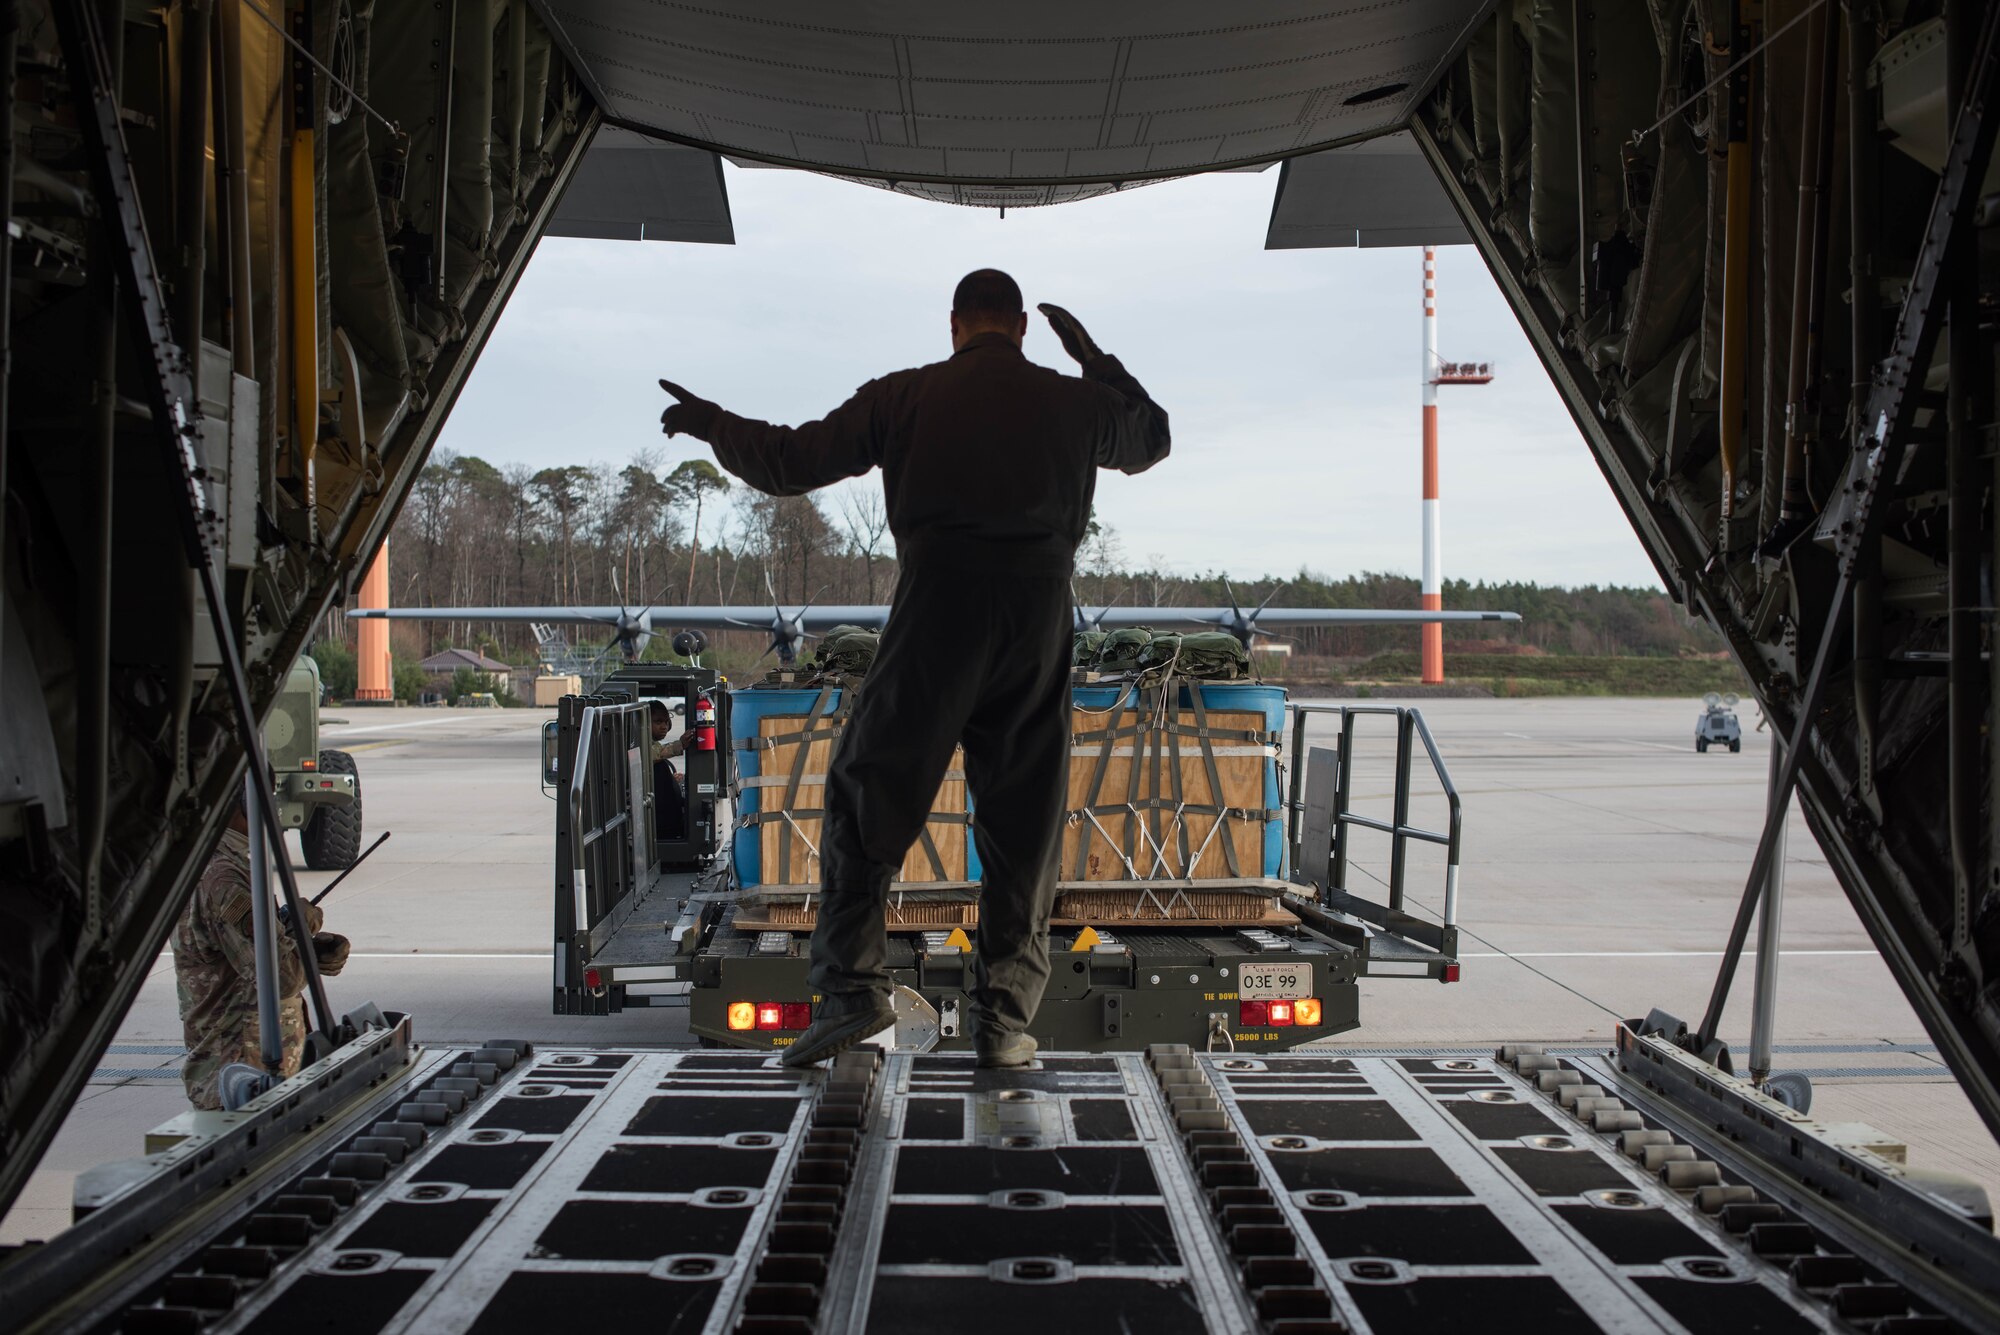 A U.S. Air Force Airman assigned to the 37th Airlift Squadron guides a mobile aerial porter before loading a C-130J Super Hercules aircraft during Exercise Agile Wolf at Ramstein Air Base, Germany, Dec. 17, 2019. Agile Wolf tests the 435th CRS’s ability to coordinate and operate mobility operations with the 37th AS for the first time at Ramstein Air Base. (U.S. Air Force photo by Staff Sgt. Devin Nothstine)